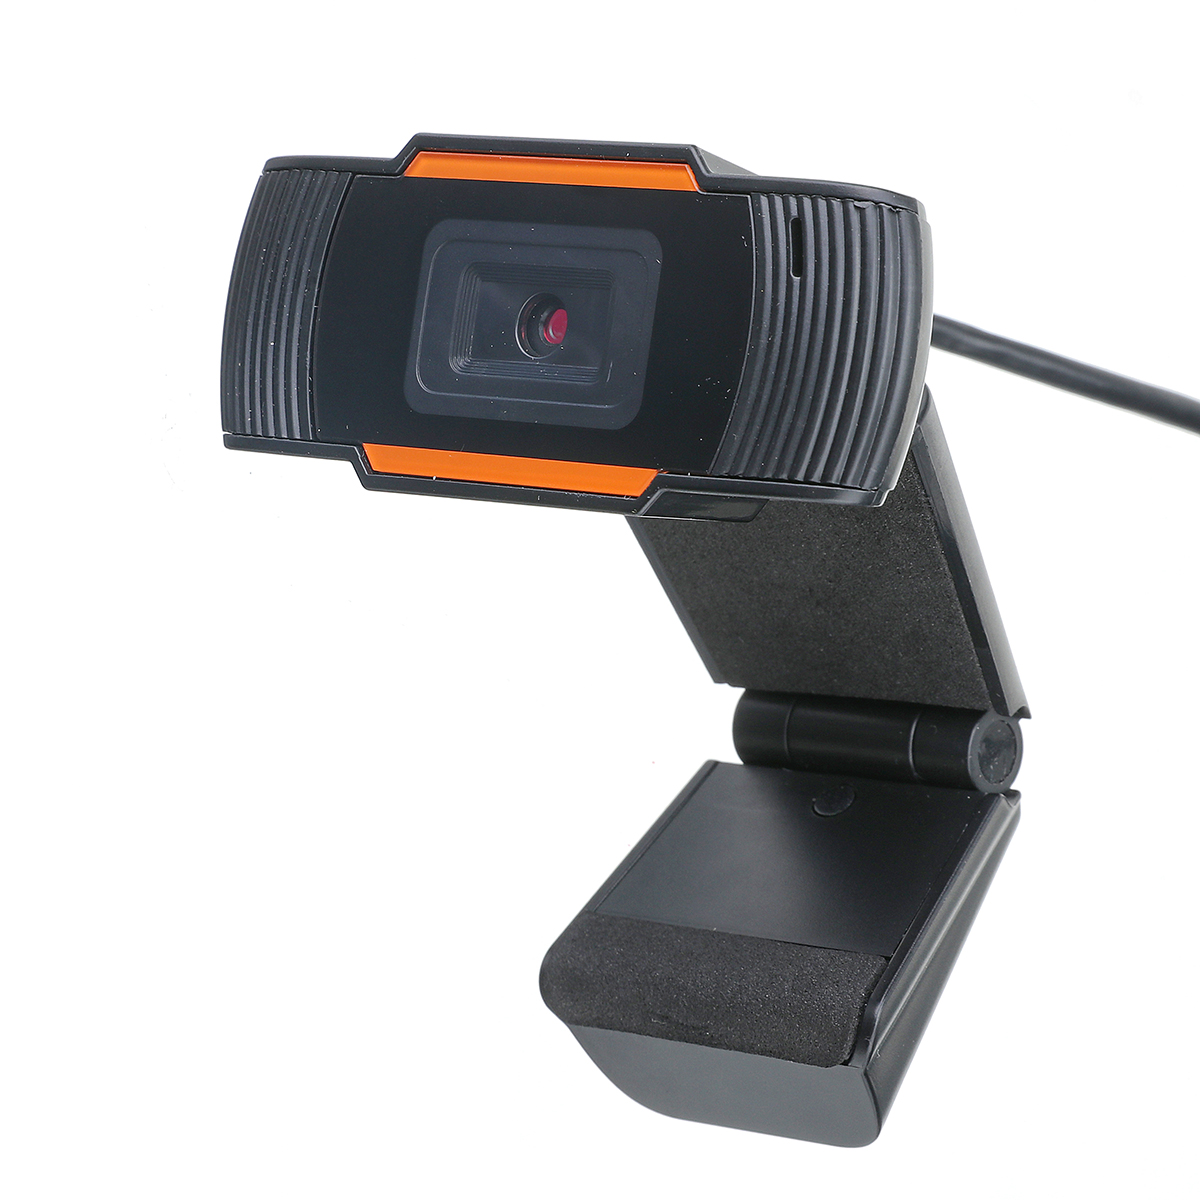 Find MECO ELEVERDE HD 1080P Webcam Auto Focus Wide Angle View Built in Noise Cancellation Microphone Wired USB2 0 Computer Camera for Sale on Gipsybee.com with cryptocurrencies